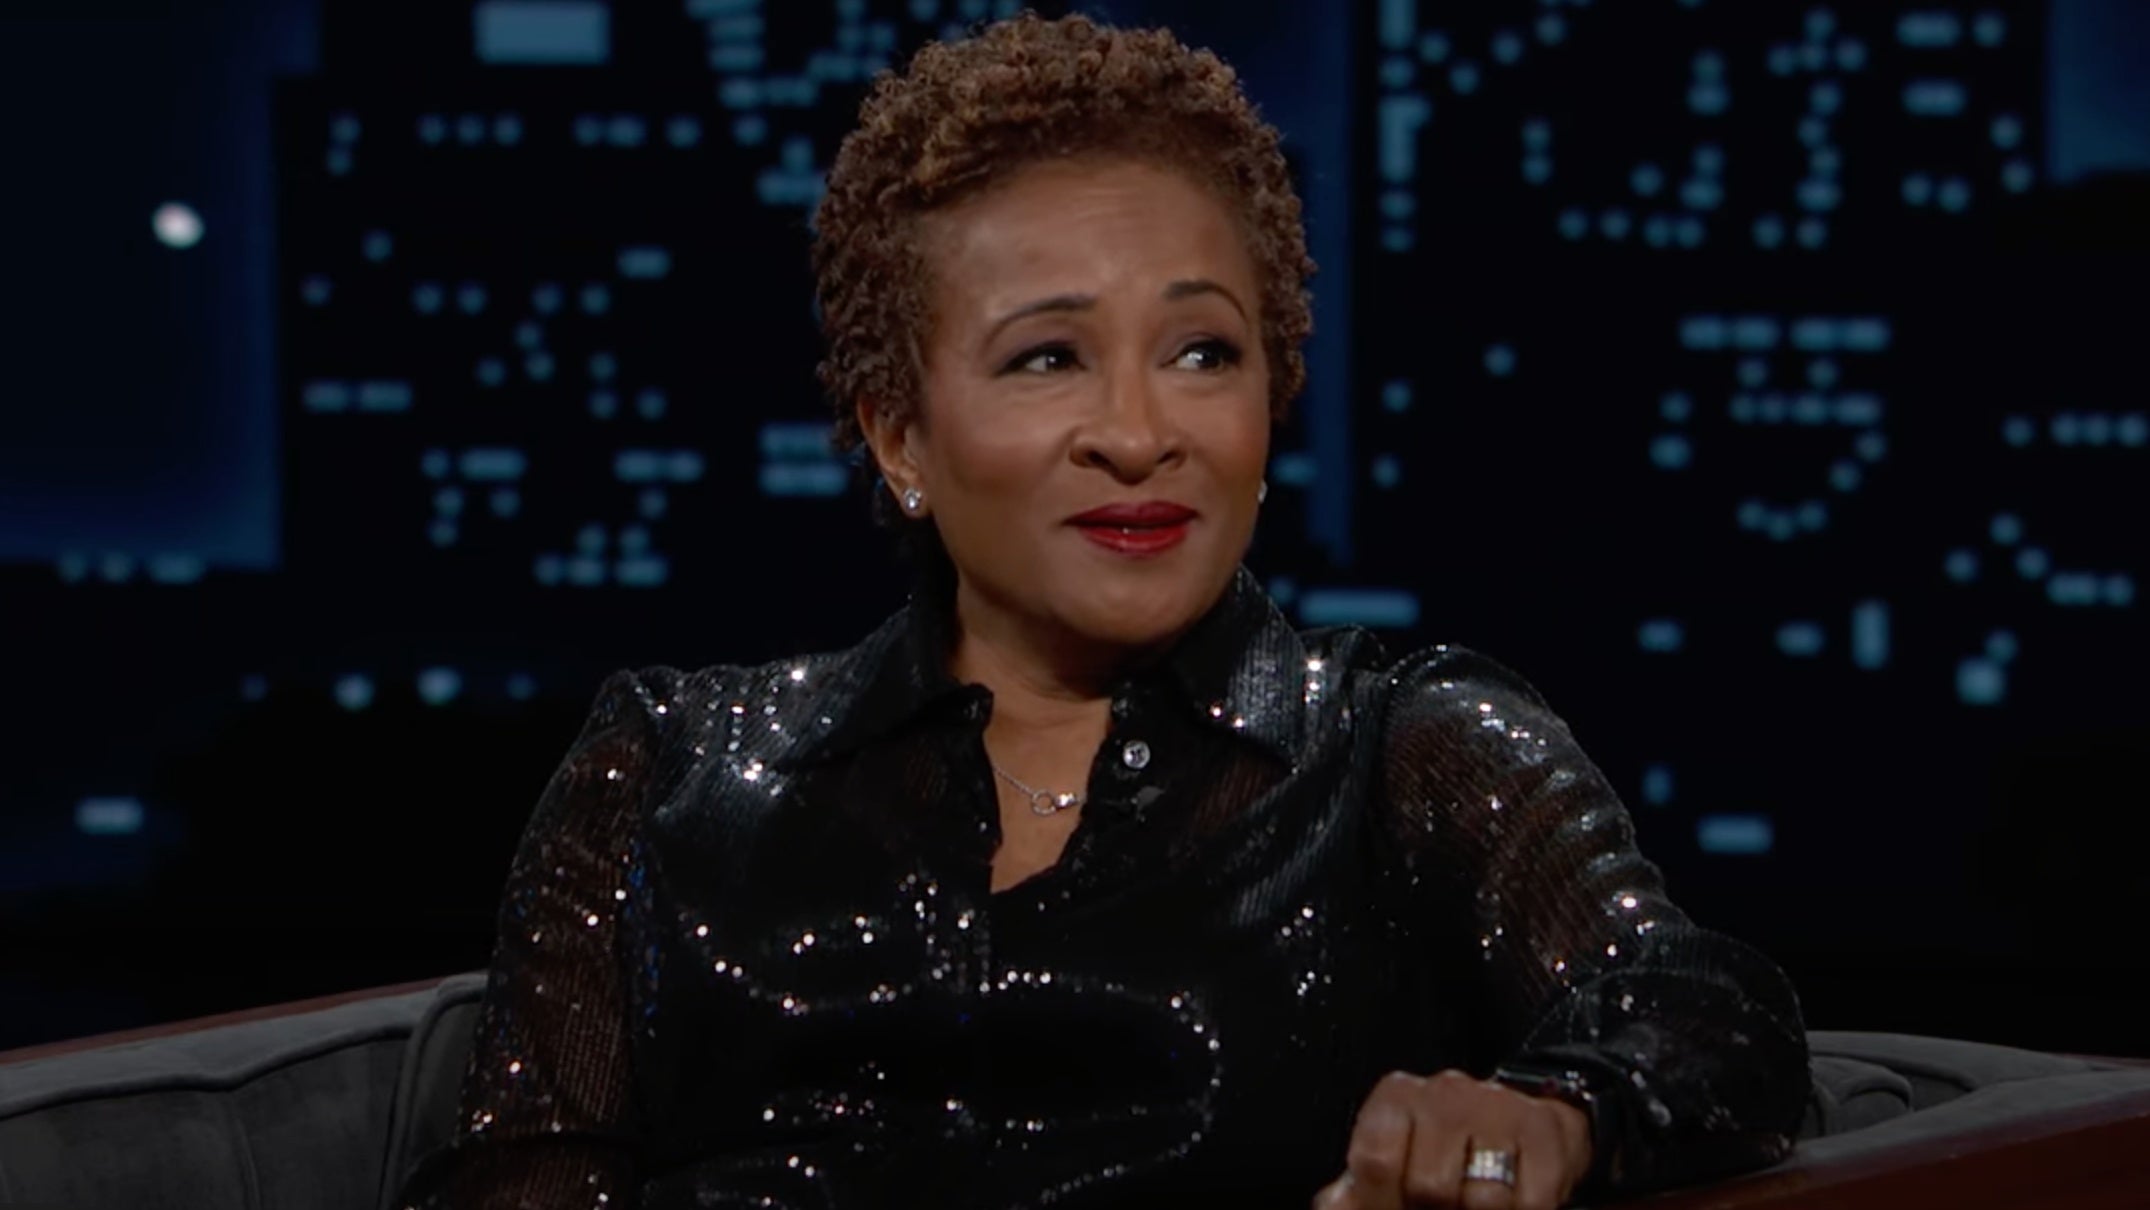 Wanda Sykes Defends Trump’s Court Behavior Because He’s ‘Old’: ‘You Fall Asleep and You Toot a Little Bit’ | Video